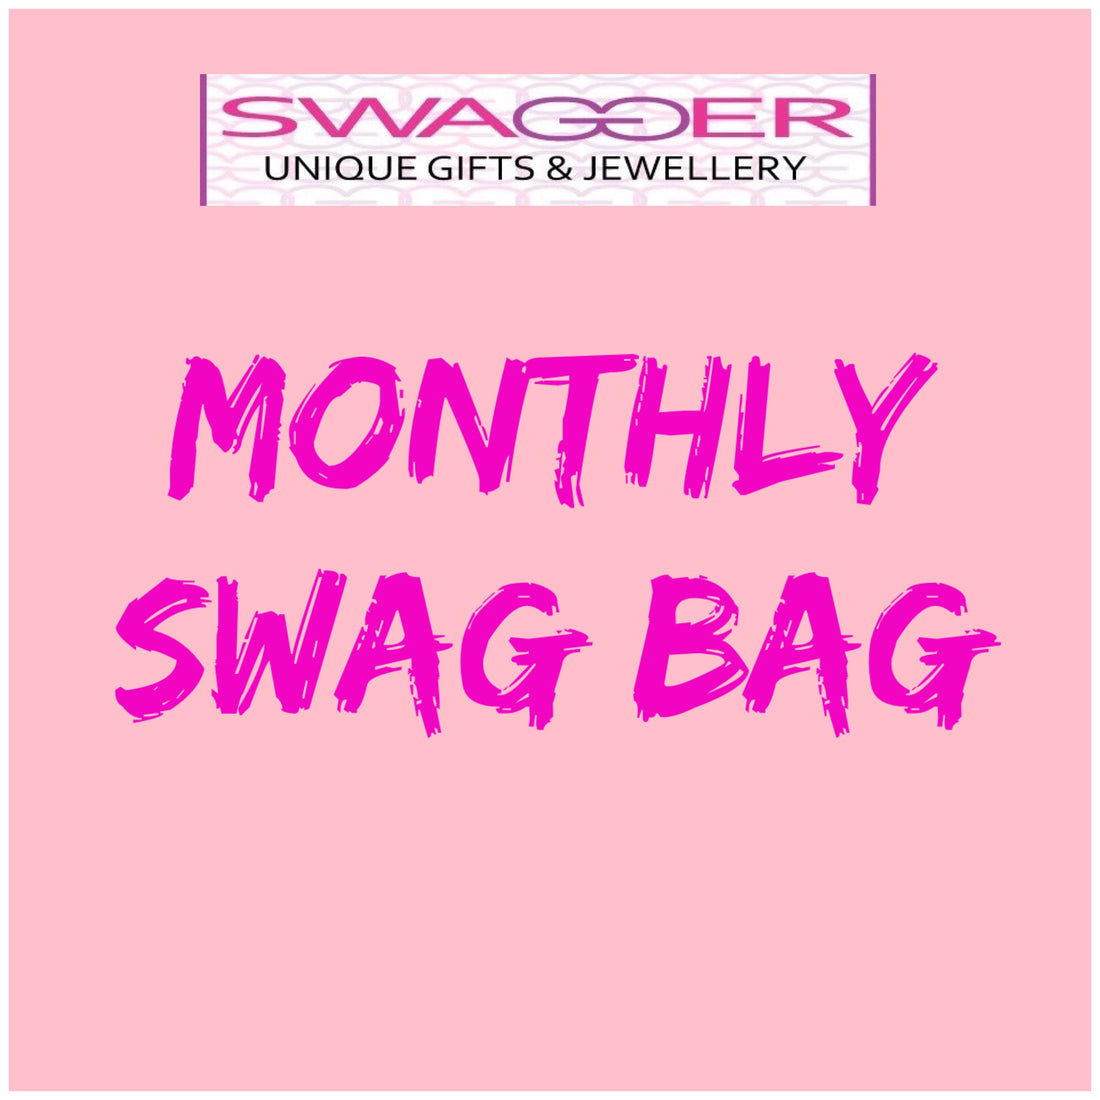 Introducing a monthly Swag Bag! Just £10!